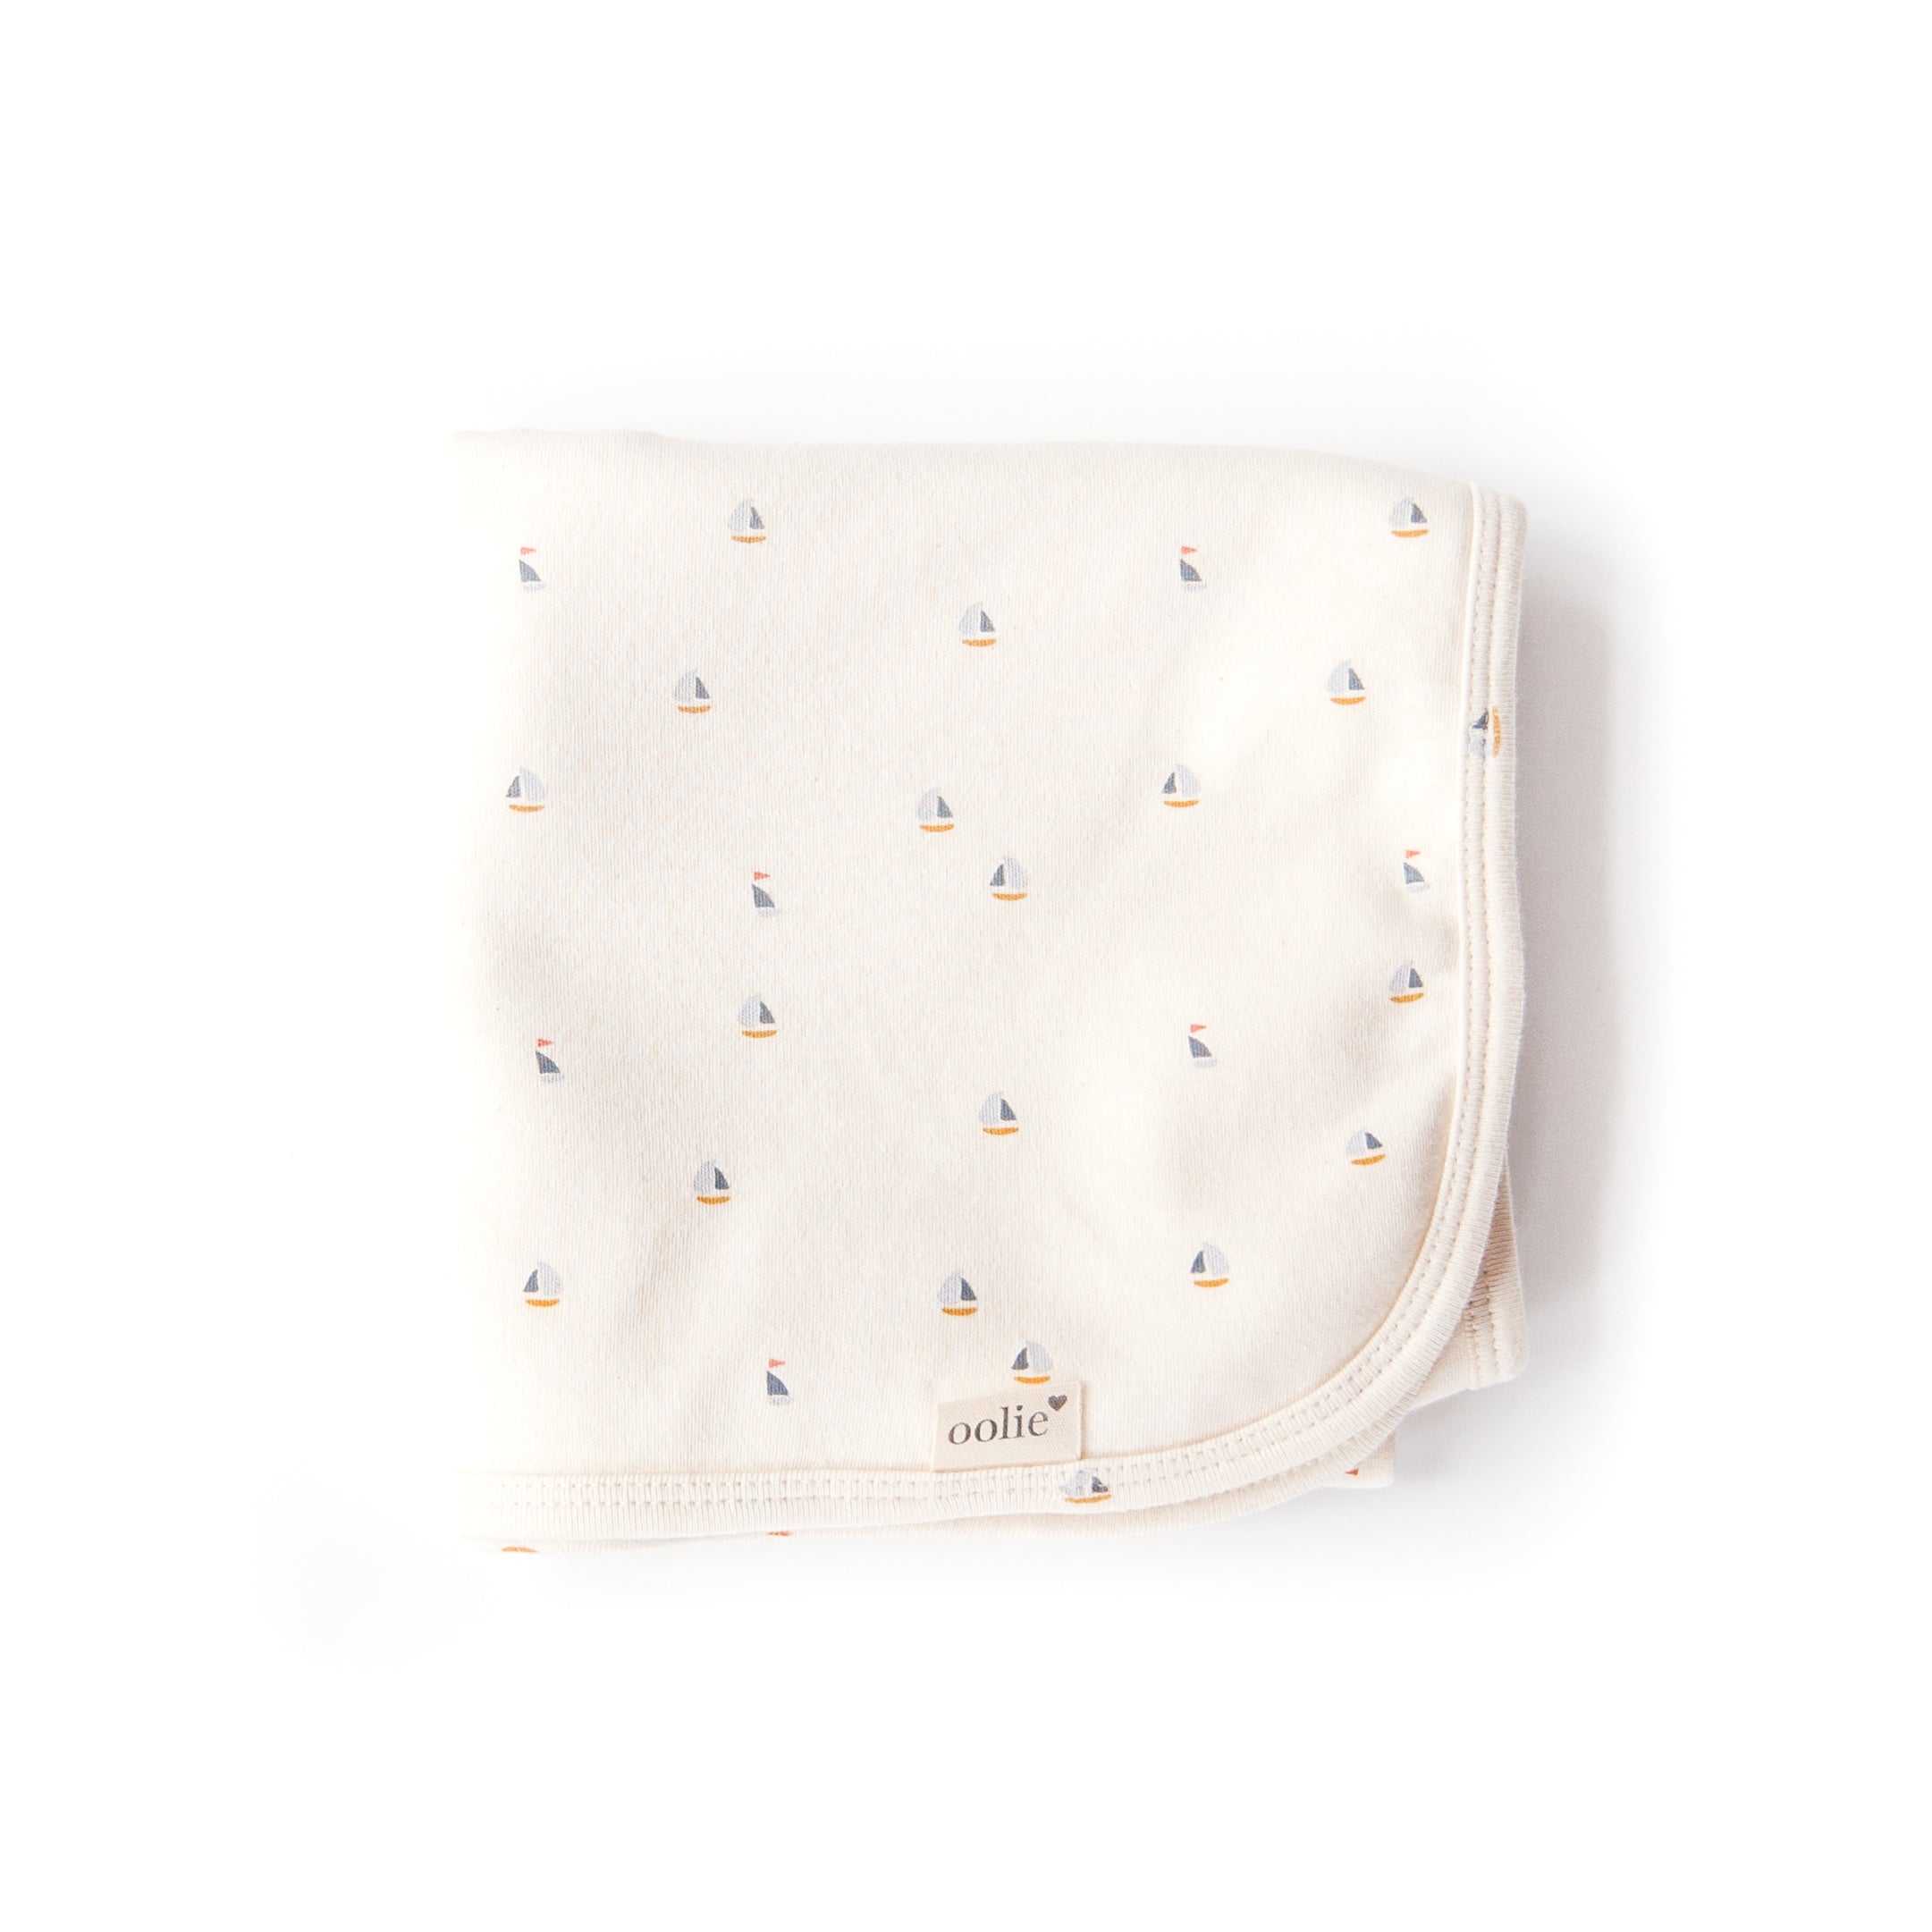 An Oolie organic cotton baby blanket with the schooner print, a natural color with small sailboats in a repeating pattern.